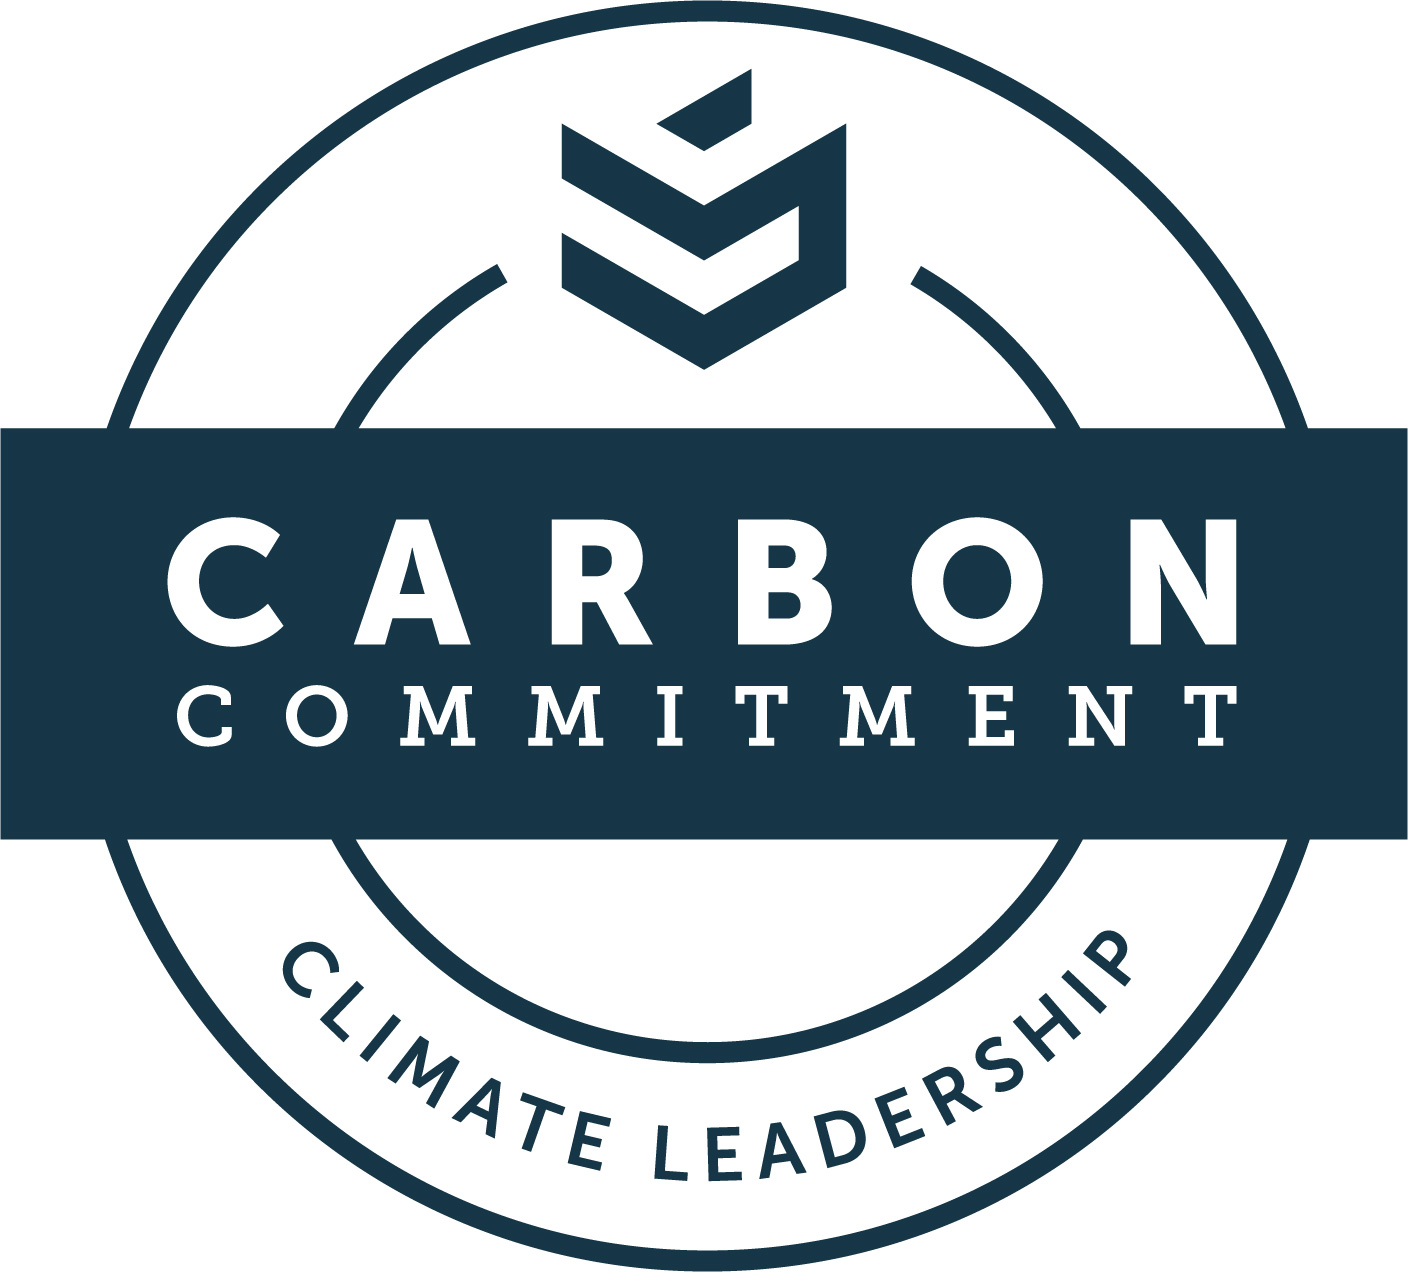 President Thomas A. Parham has signed the Presidents' <a href="https://secondnature.org/signatory-handbook/the-commitments/" target="_blank" rel="noopener">Climate Leadership Commitment</a> pledging the university to carbon neutrality. The methane released by landfills is 28 times more potent than carbon dioxide.